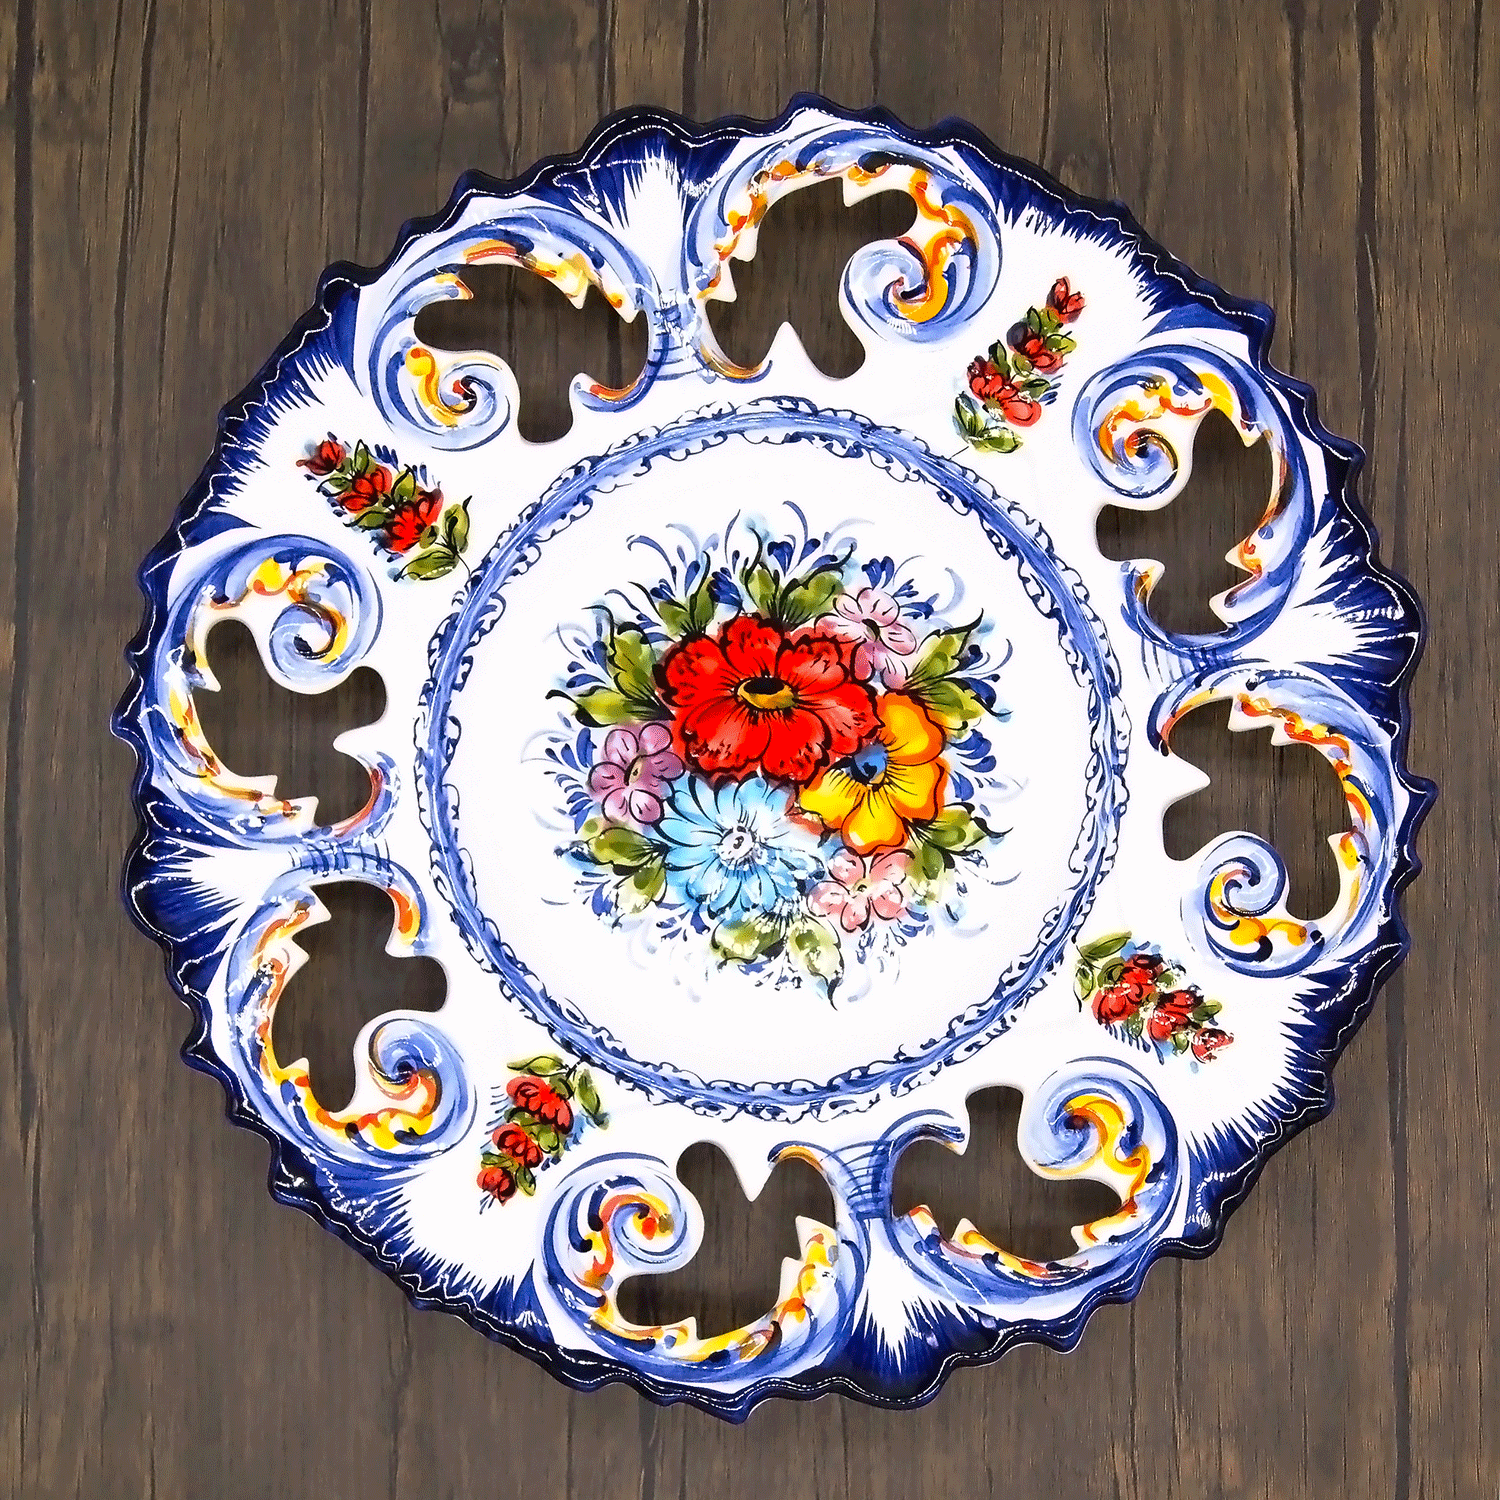 14 Inch Hand painted Portuguese Ceramic Wall Decor Hanging Plate